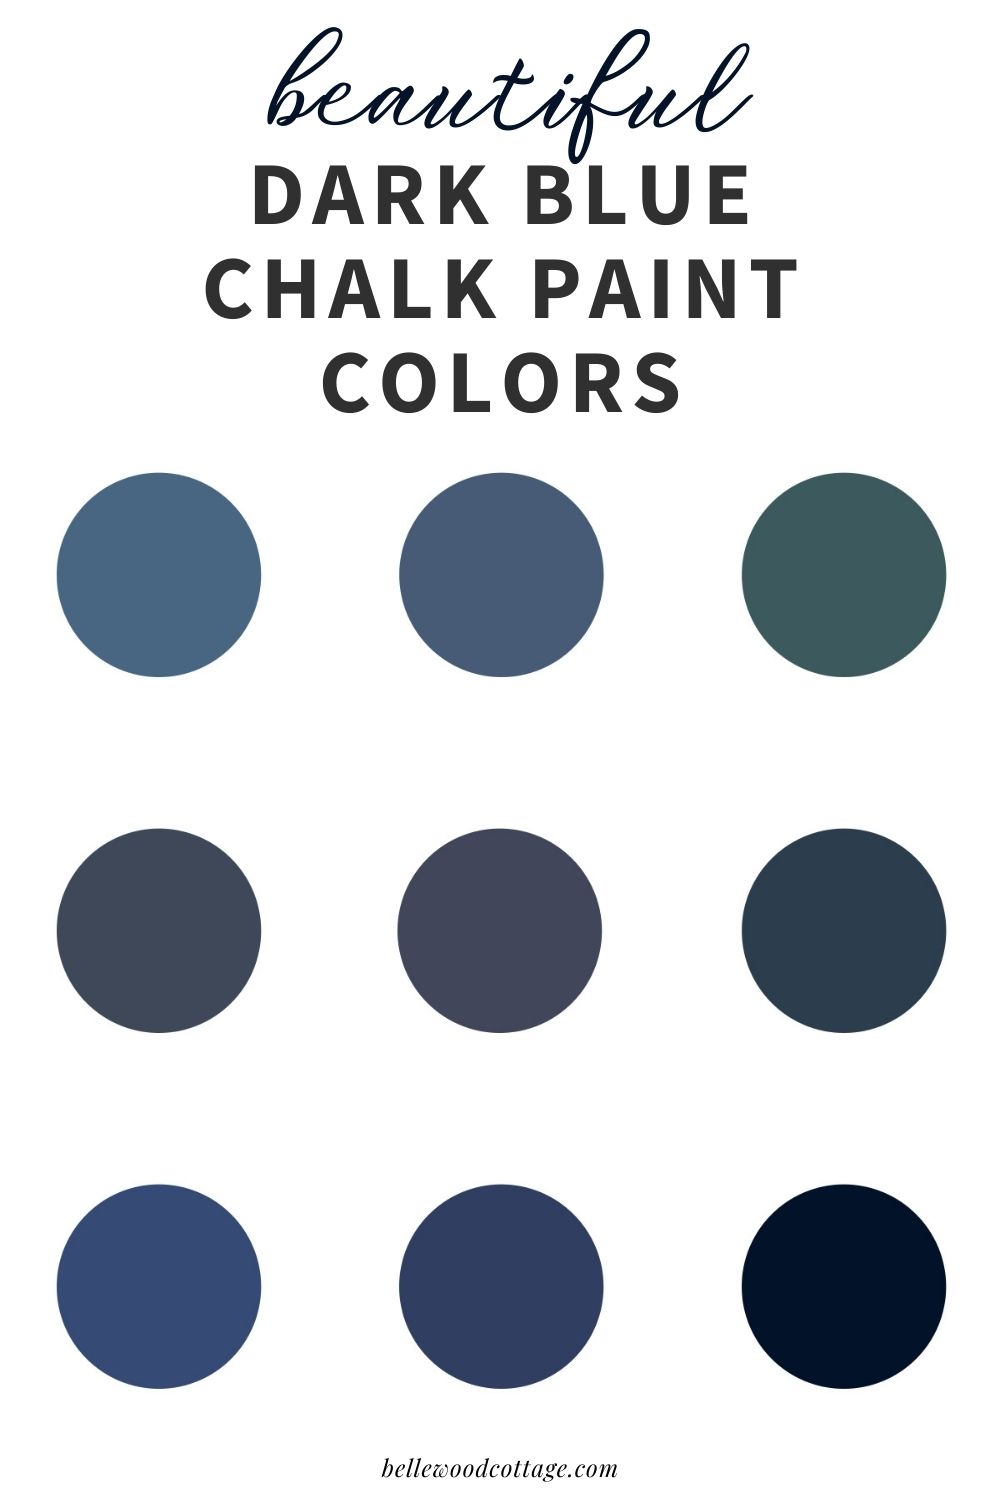 A collage of dark blue paint swatches with the words, "Beautiful Dark Blue Chalk Paint Colors".